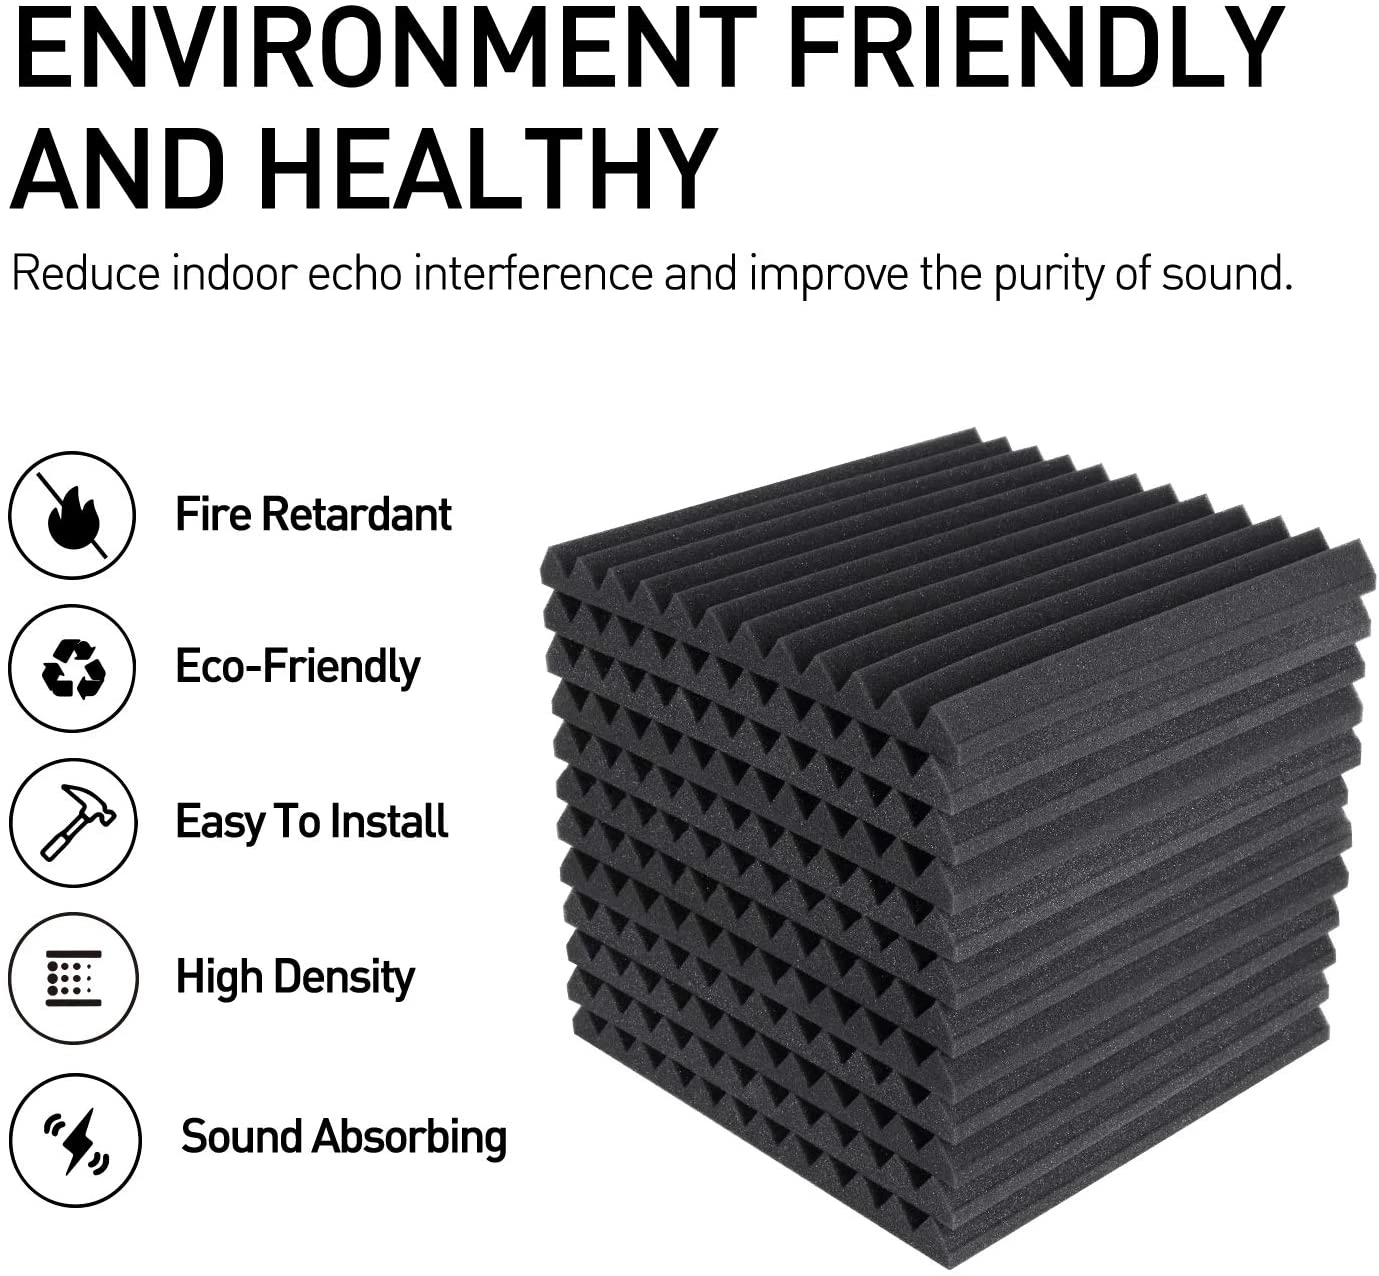 High Density Fireproof Wedges Absorbing Acoustic Sound Panel Recording Studio Soundproof Acoustic Foam